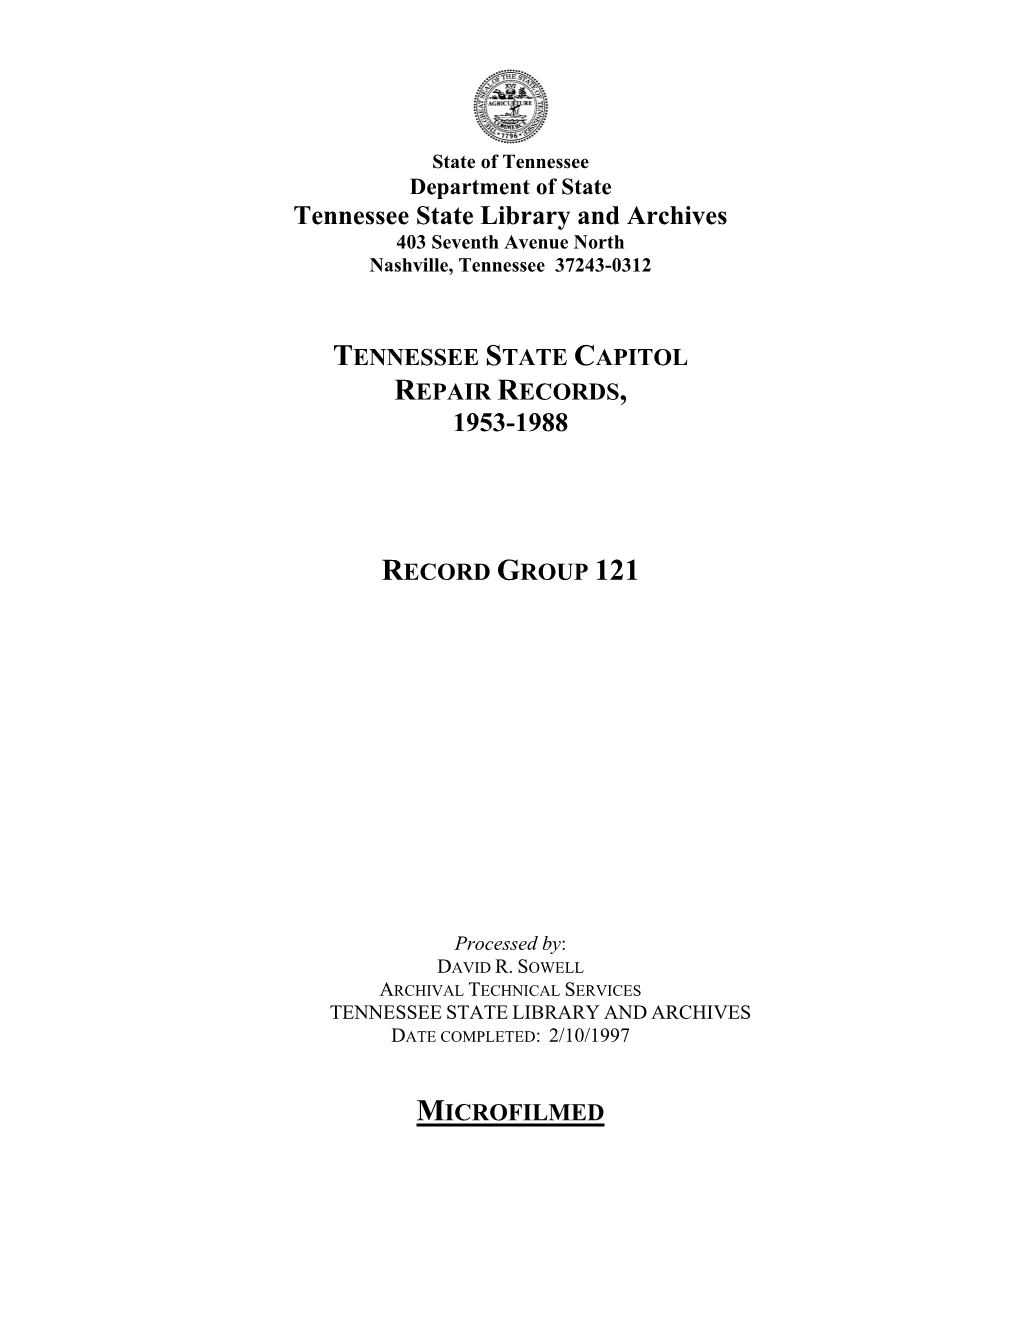 Tennessee State Capitol Repair Records, 1953-1988